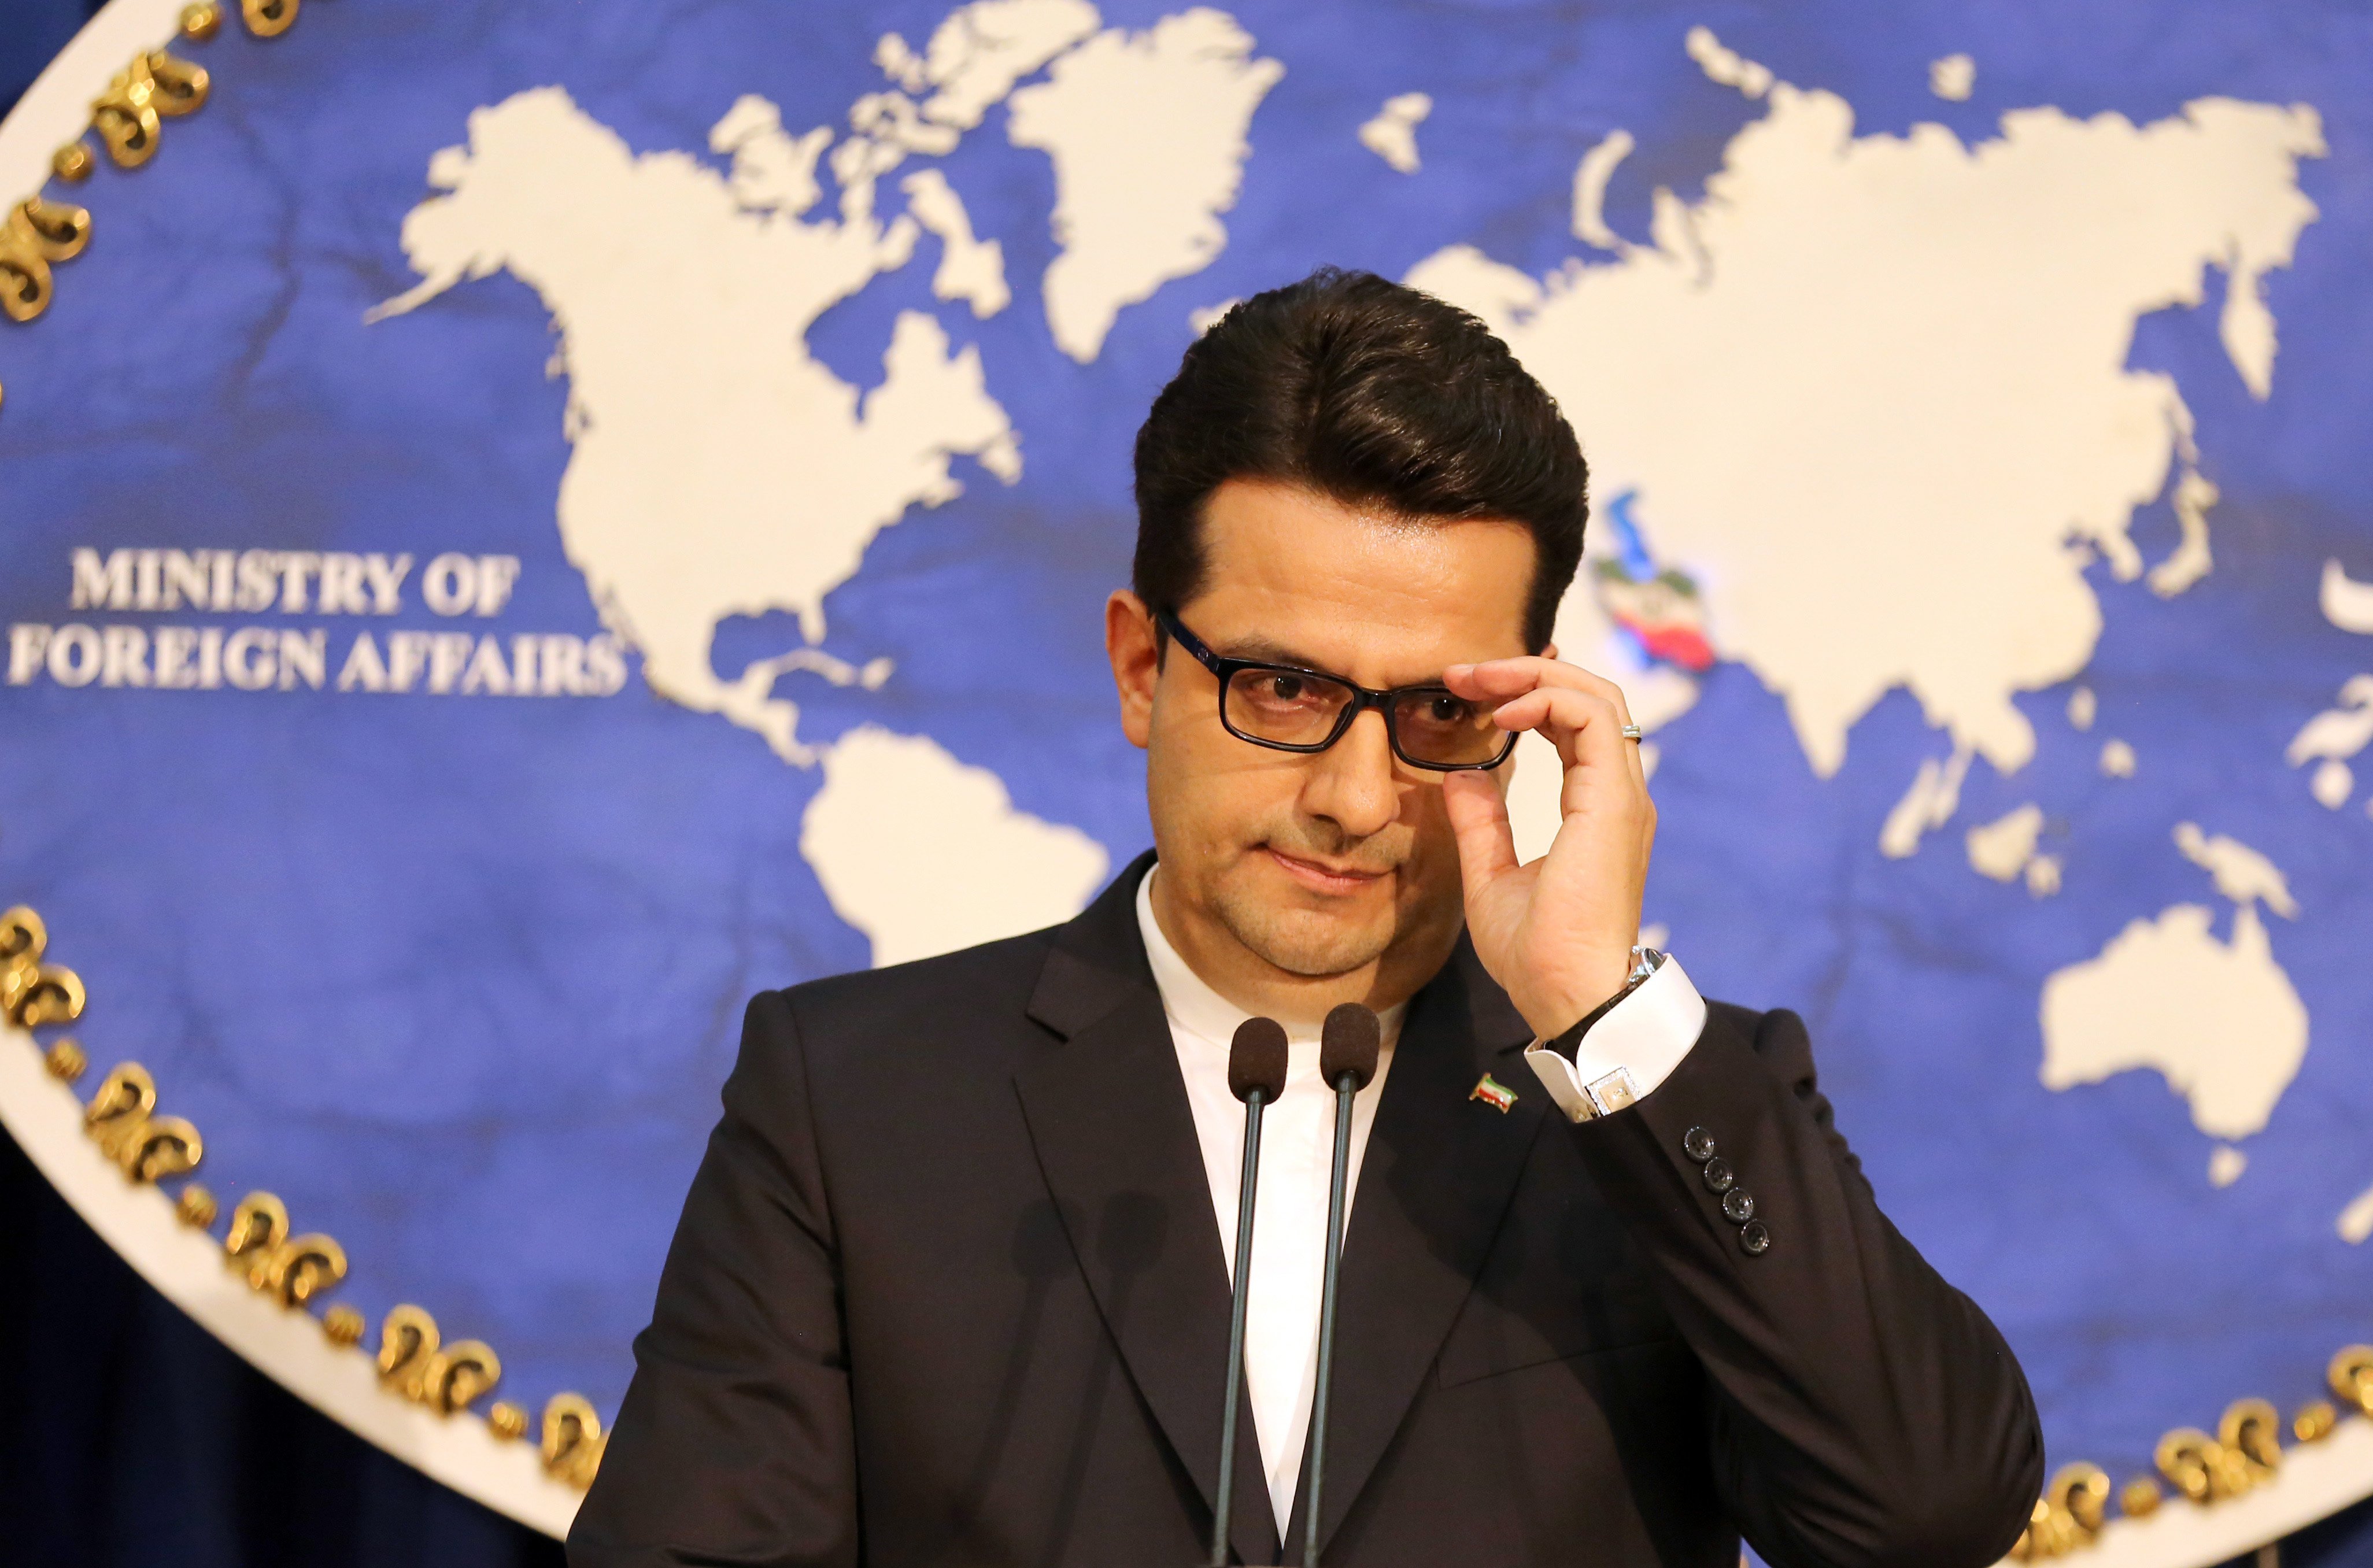 Abbas Mousavi, spokesman for Iran's Foreign Ministry, gives a press conference in the capital Tehran on May 28, 2019. (ATTA KENARE/AFP/Getty Images)